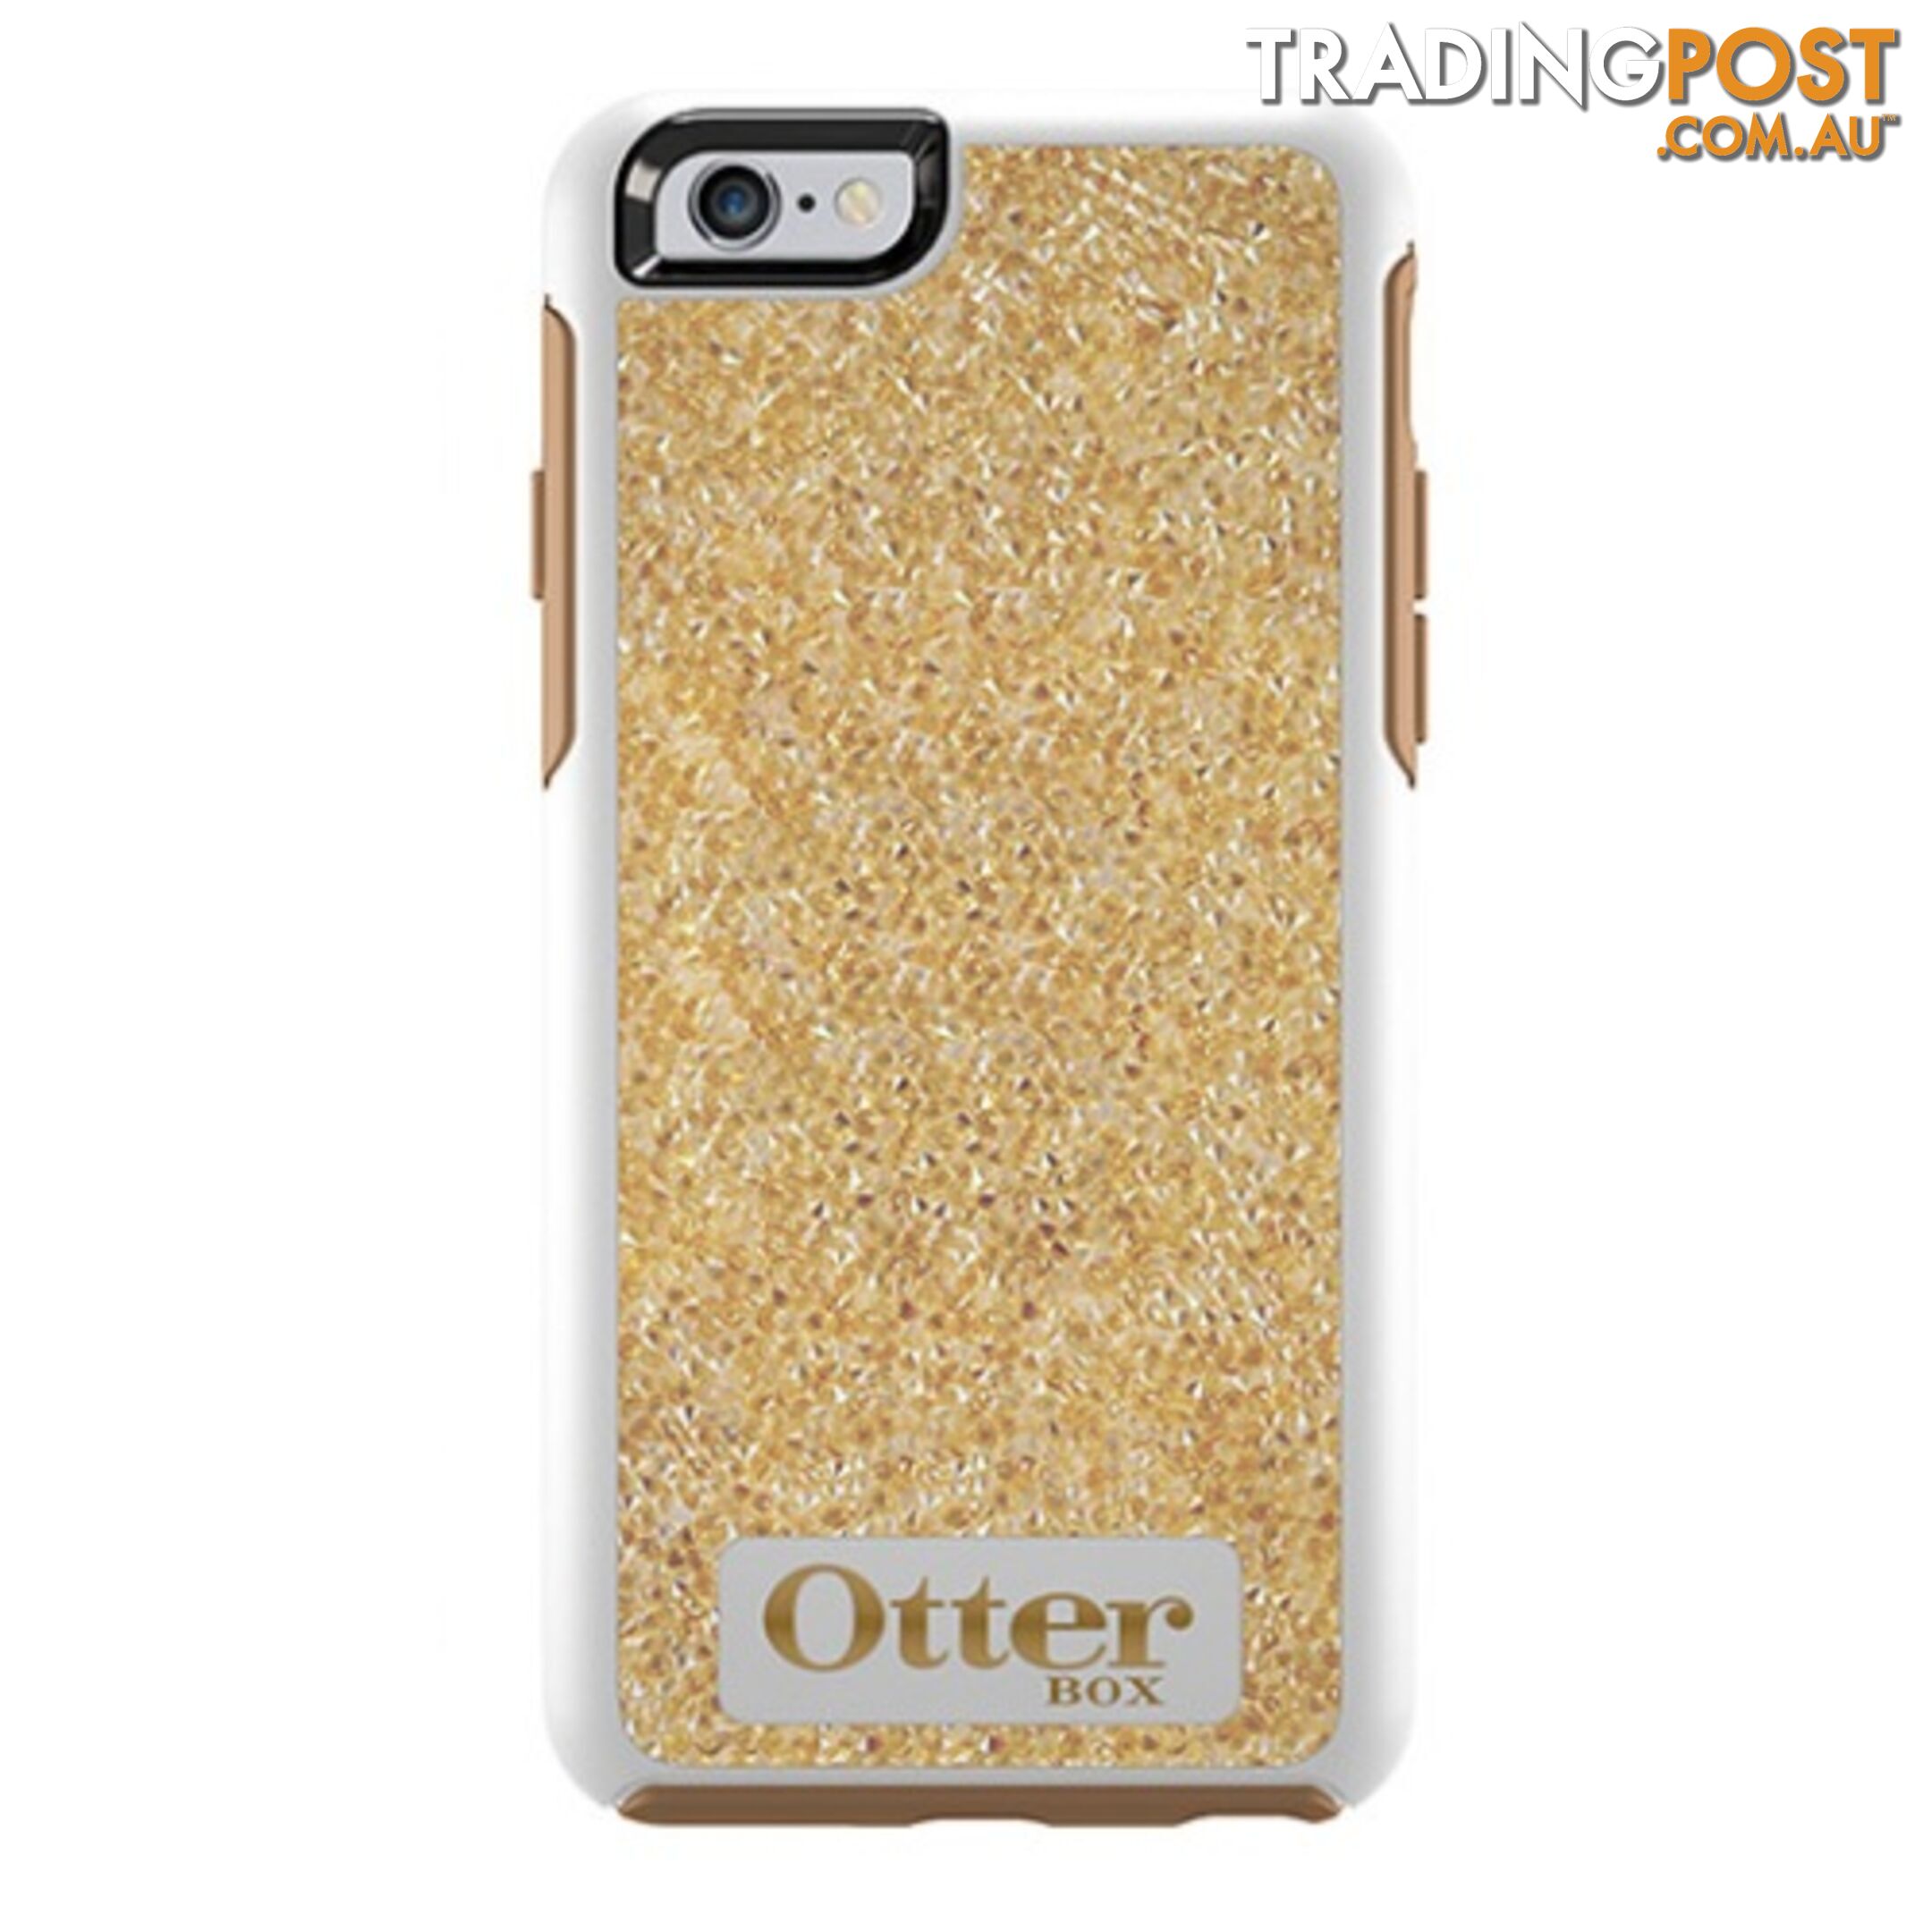 OtterBox Symmetry Series Crystal suits iPhone 6/6S - Gold Sand Crystal - 660543396758/78-50905 - OtterBox